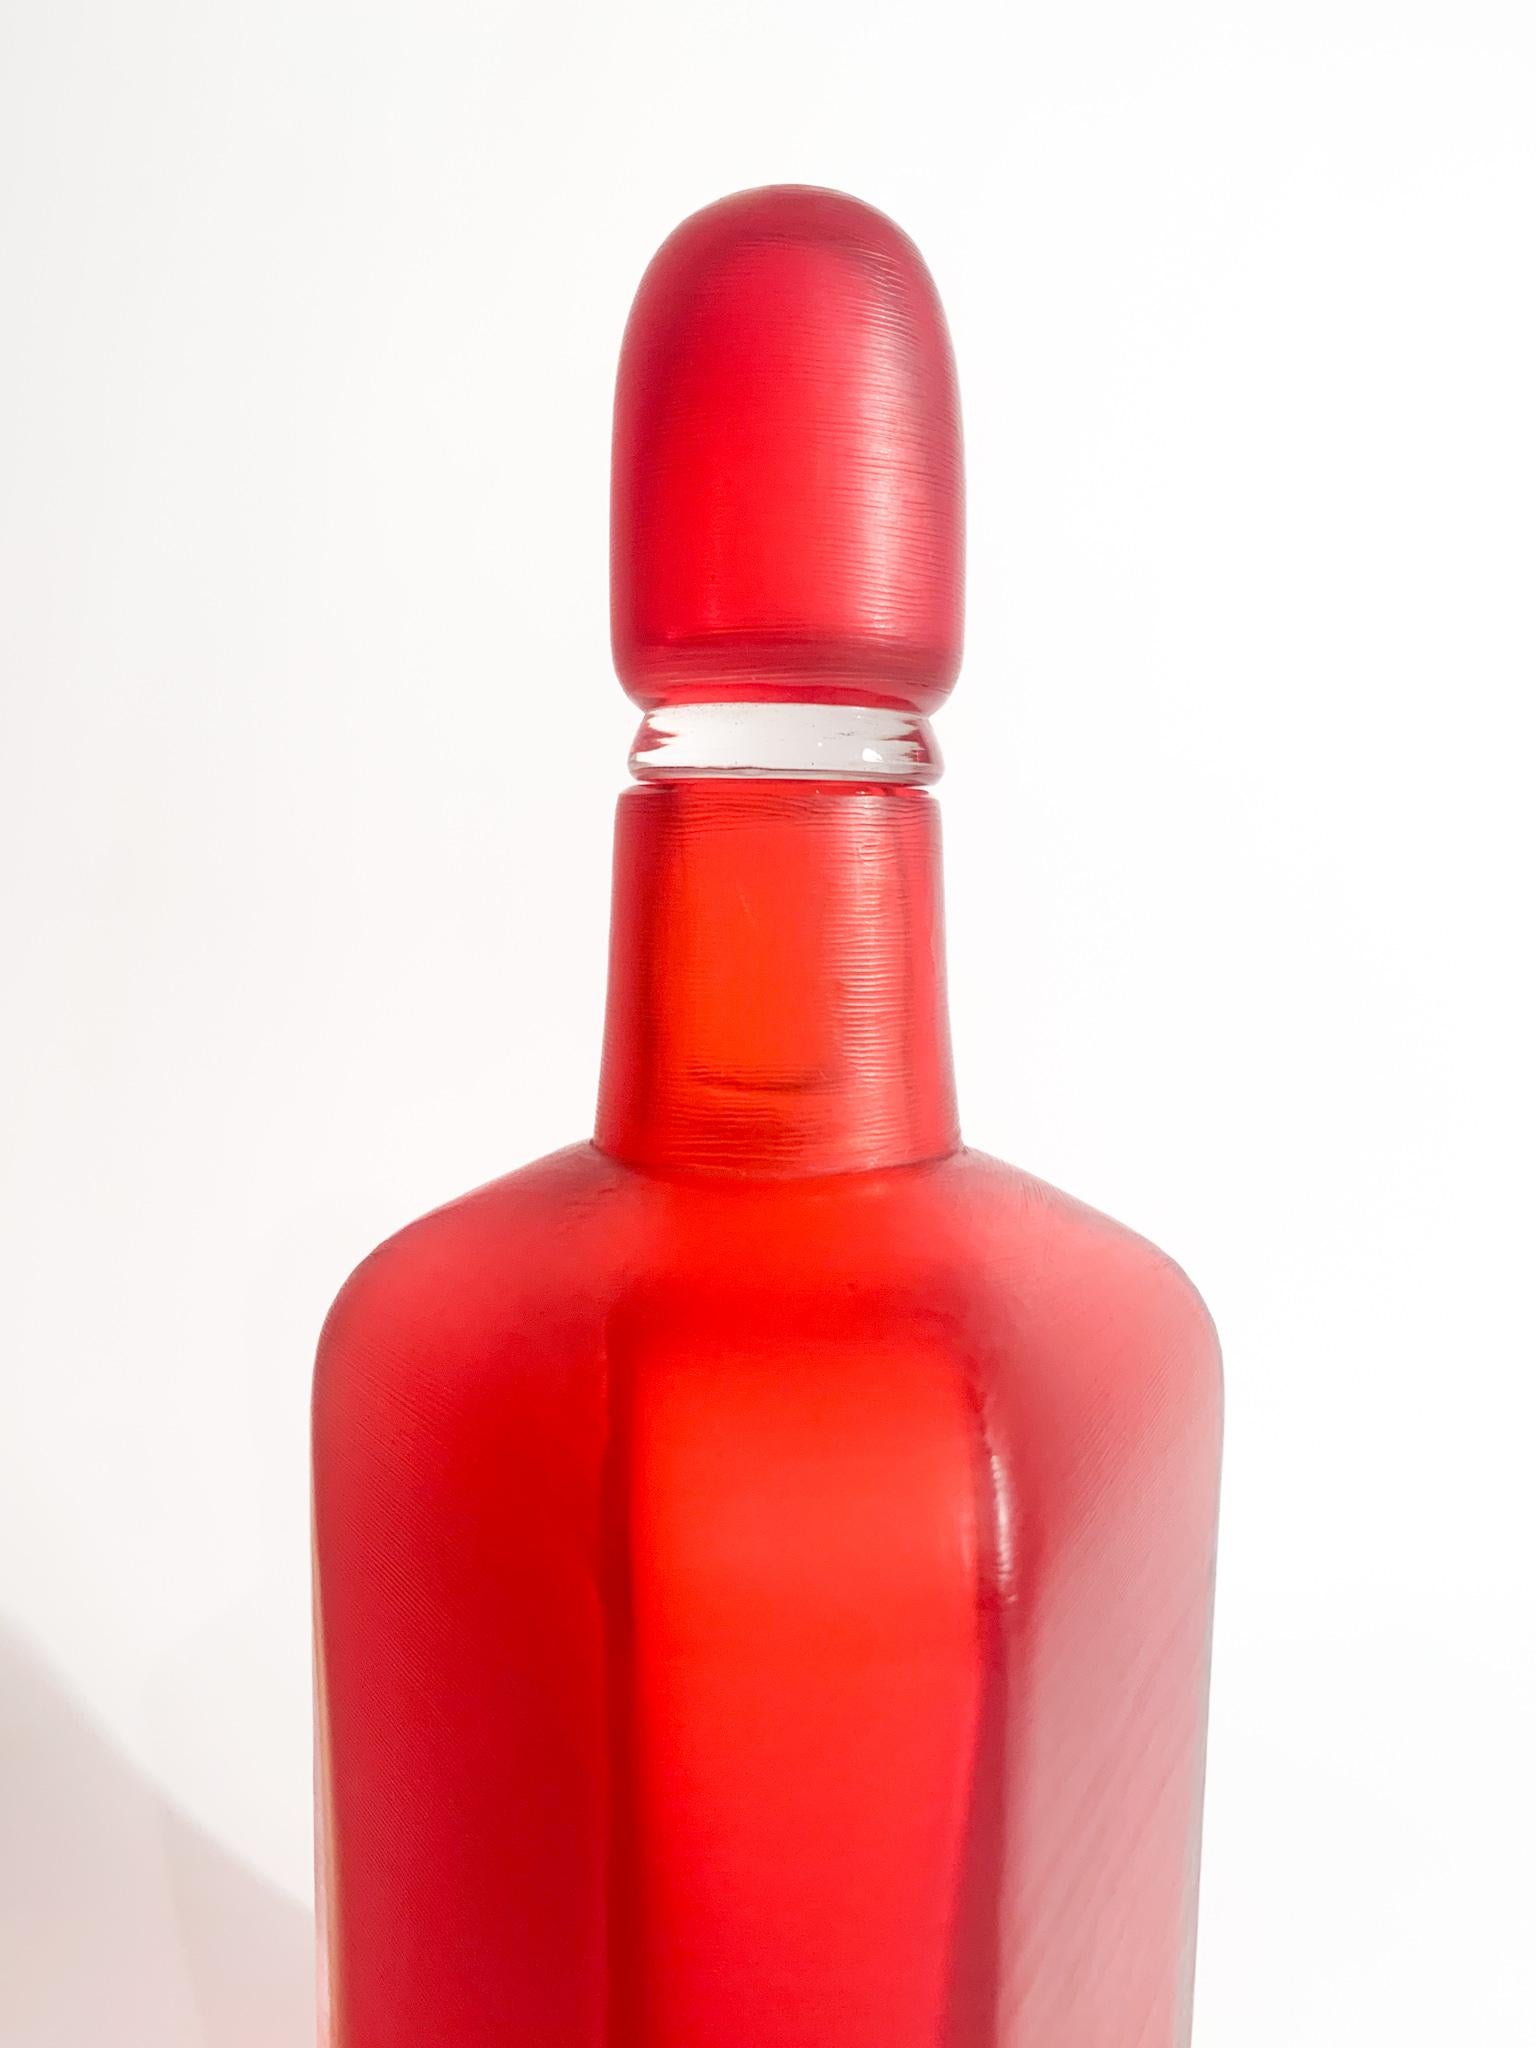 Red Murano glass bottle, belonging to the 'Bottiglie Incise' collection designed and created by Paolo Venini in 2004

Ø 9 cm h 26 cm